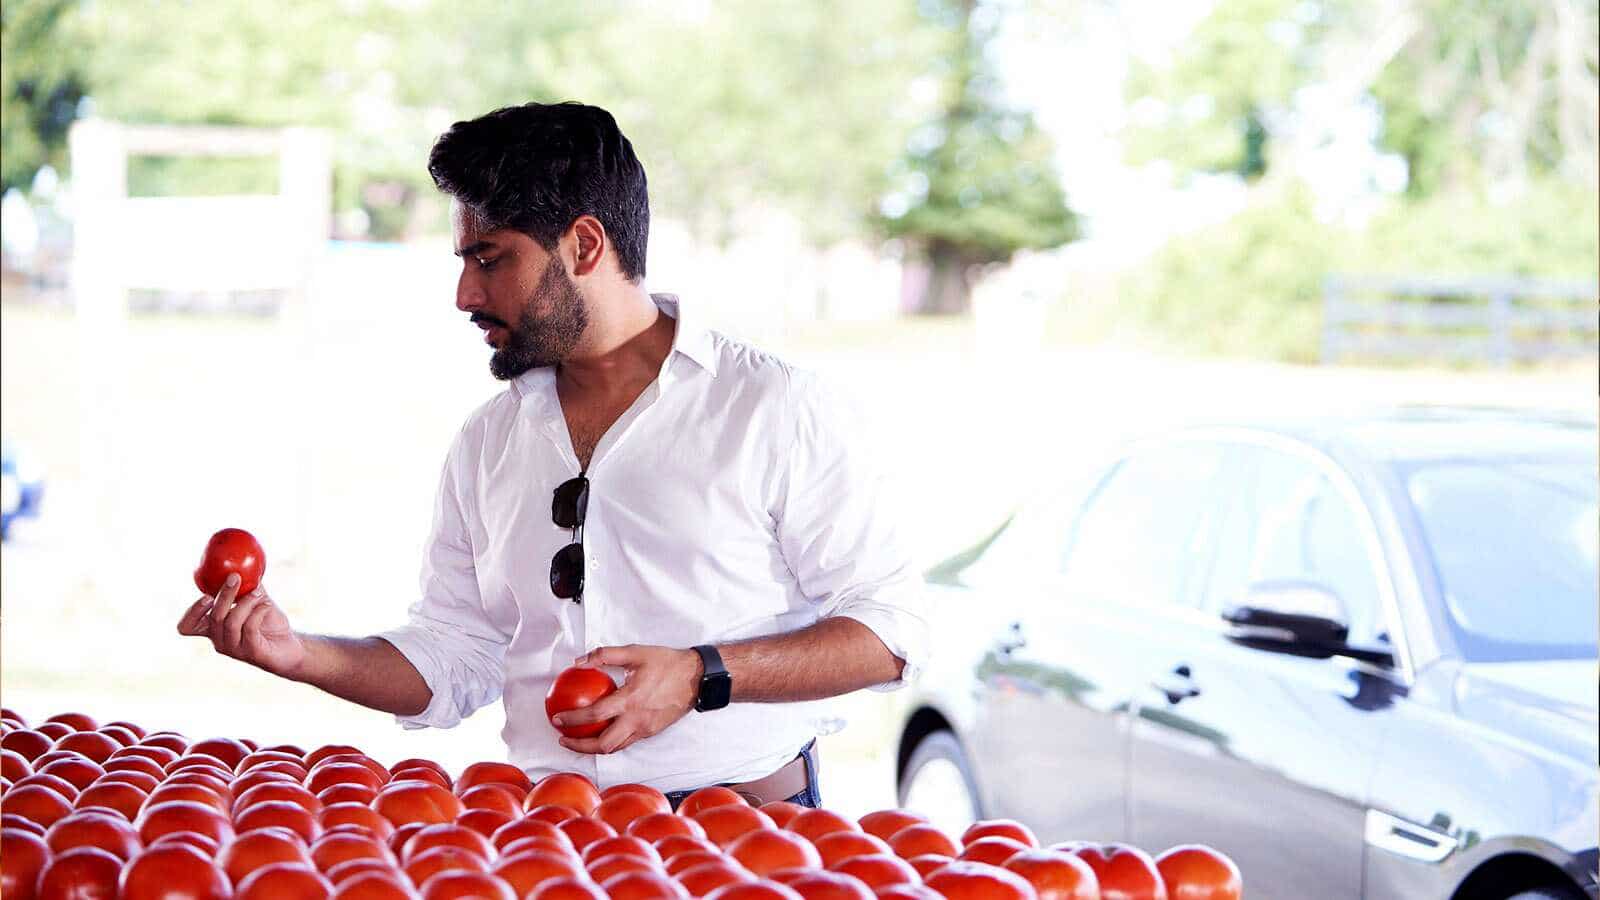 Sourcing fresh tomatoes